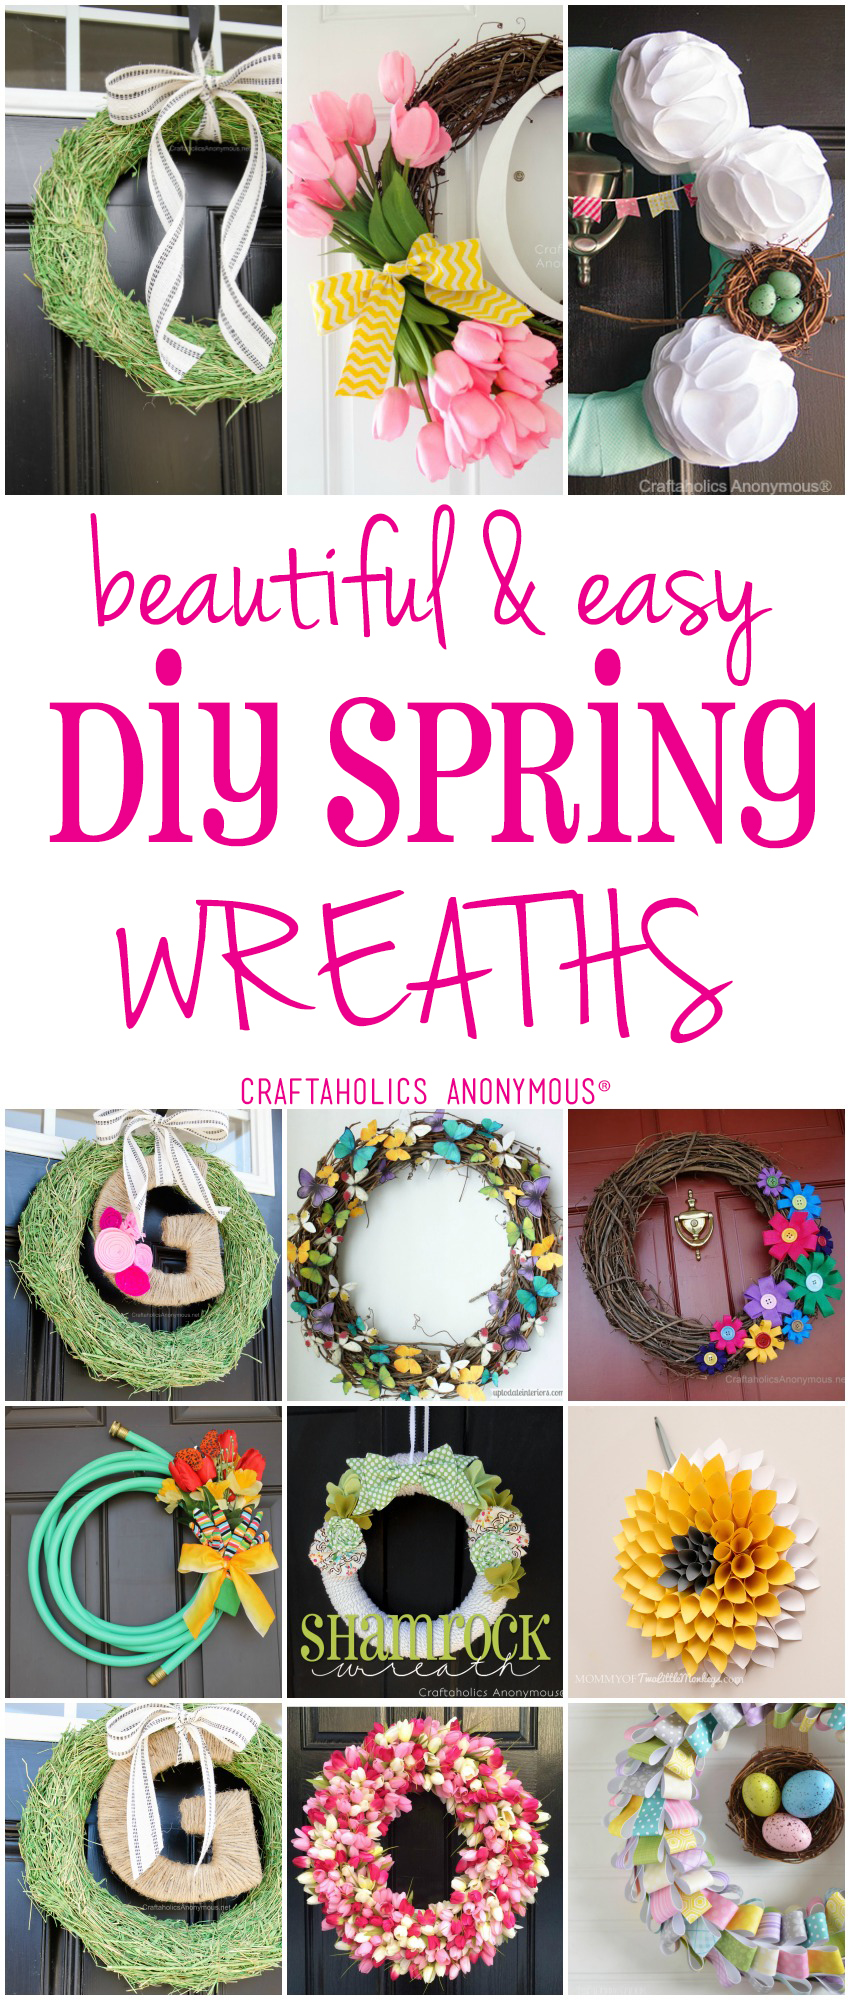 Easy and Beautiful DIY Spring Wreaths to add a touch of spring to your front porch at craftaholicsanonymous.net